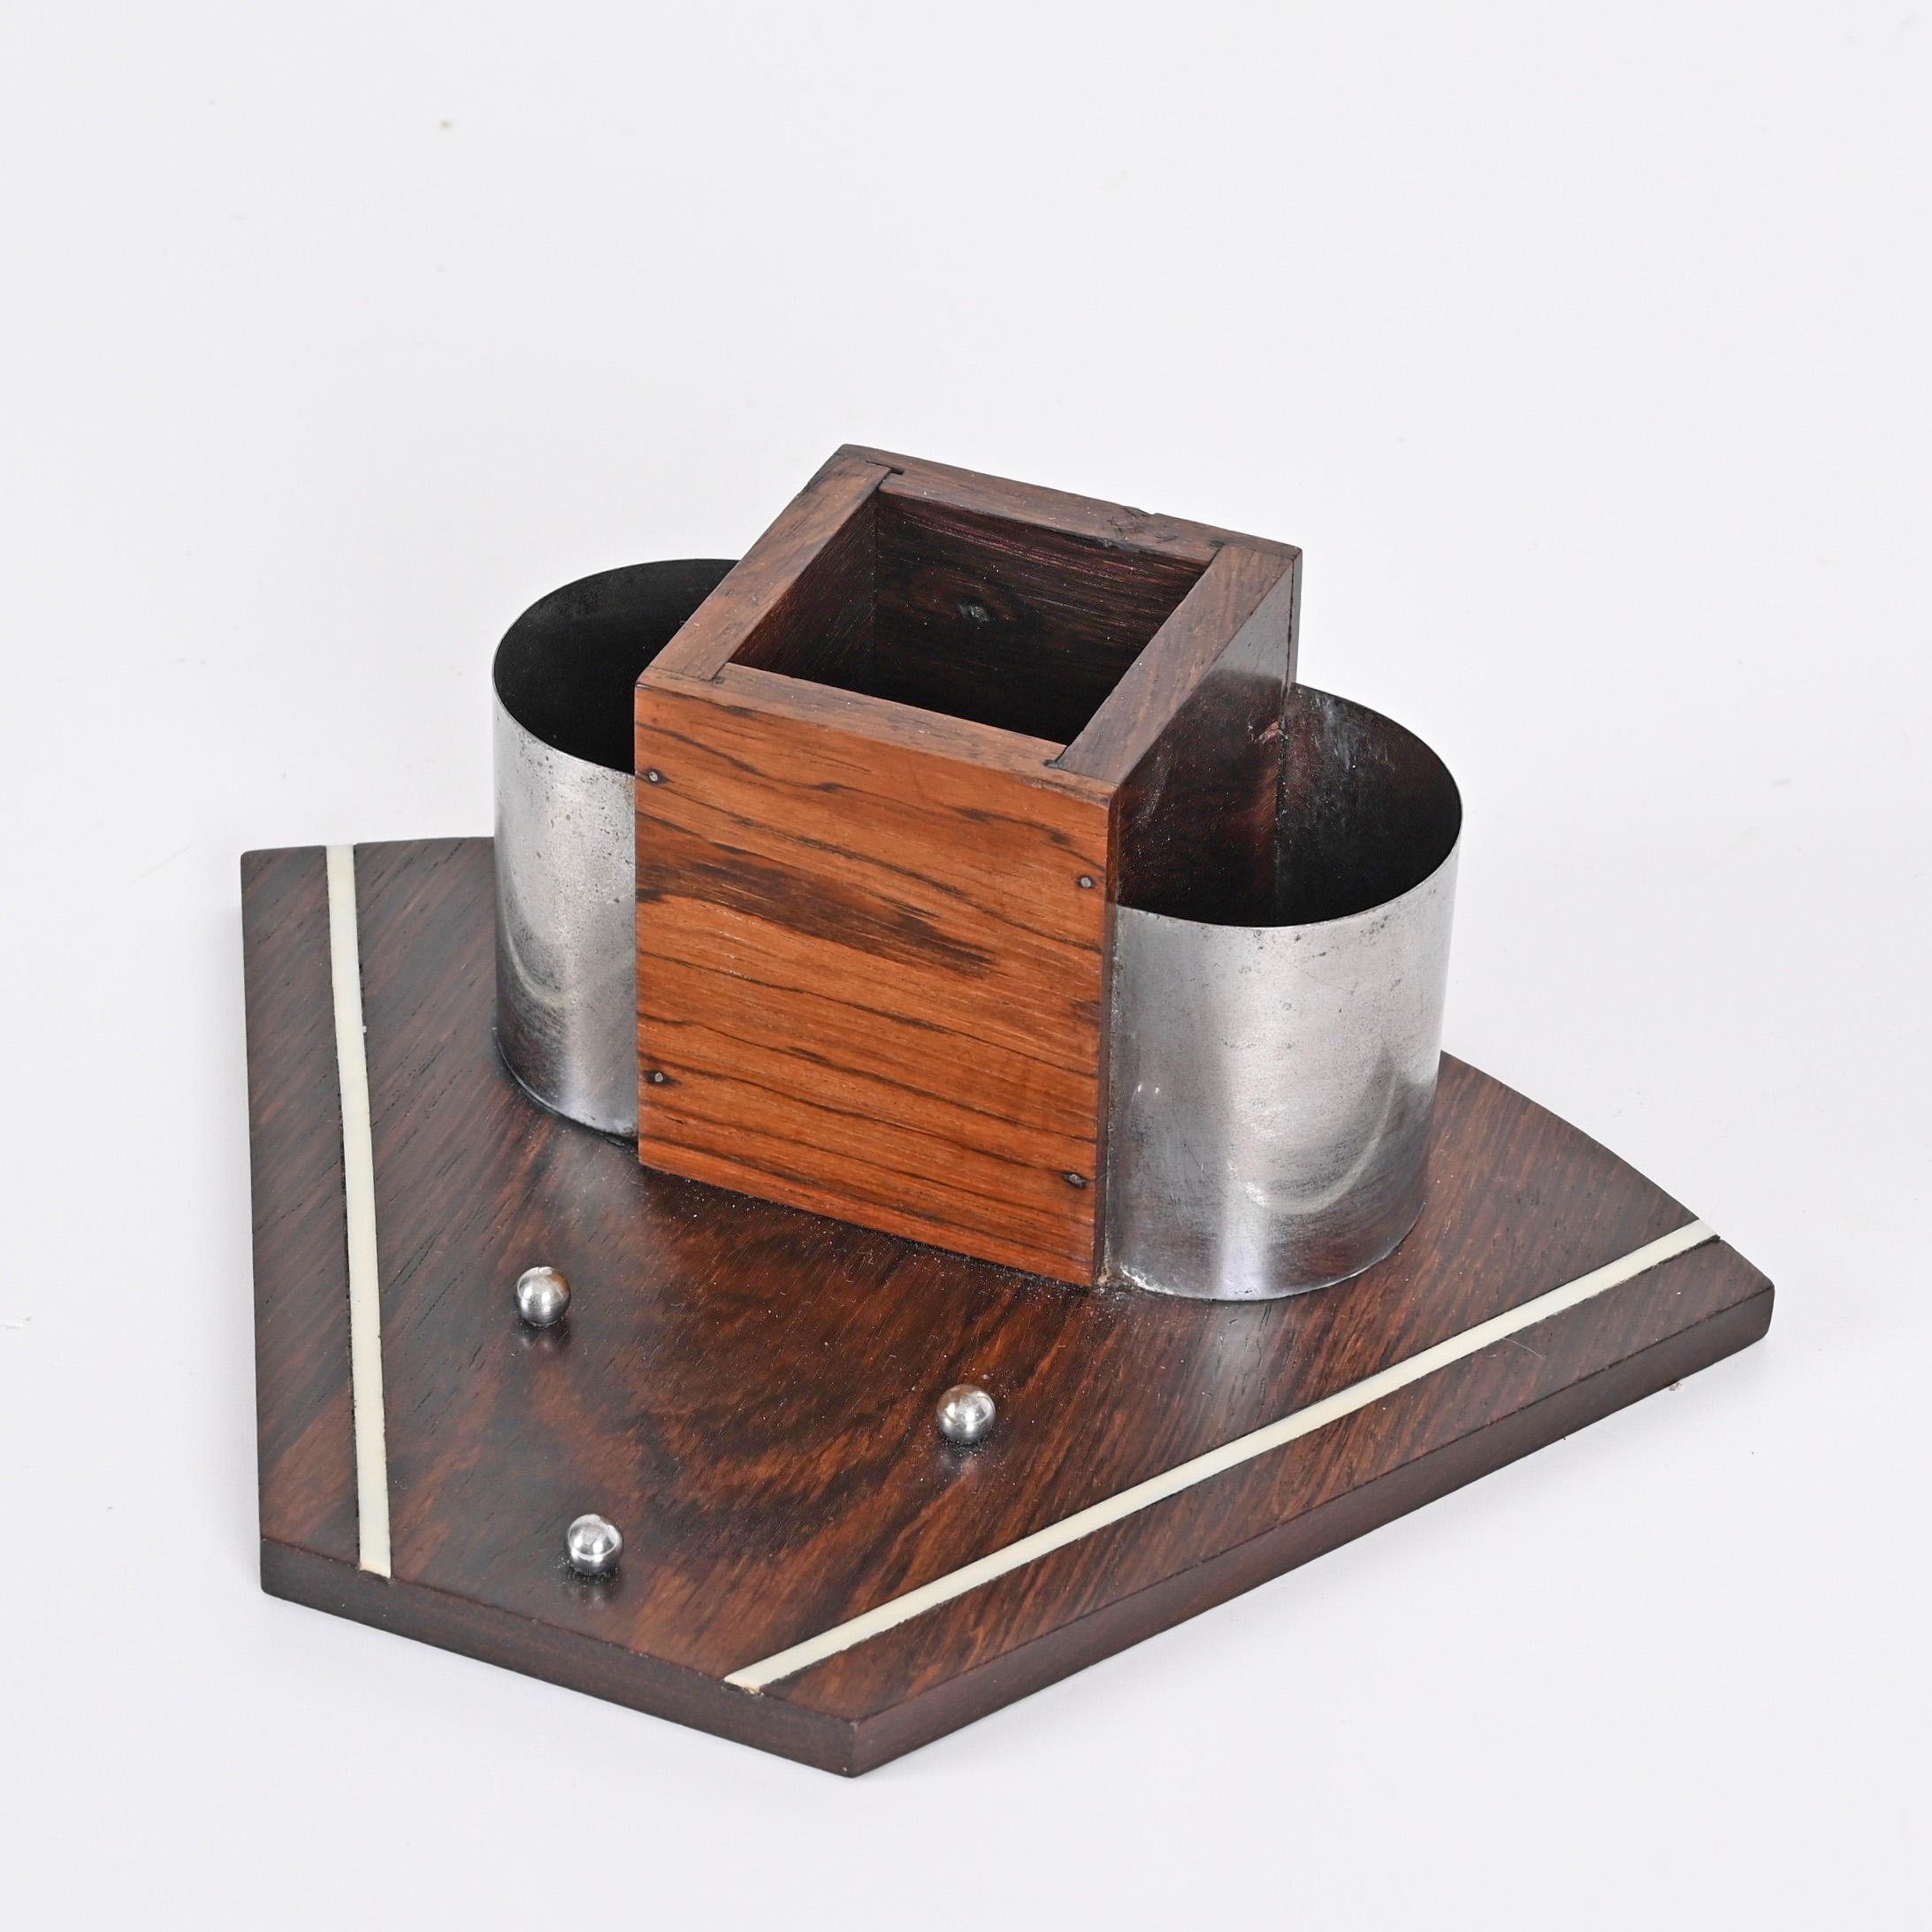 Art Deco Pen Holder in Macassar Wood, Italy Desk Accessory from the 1930s For Sale 1